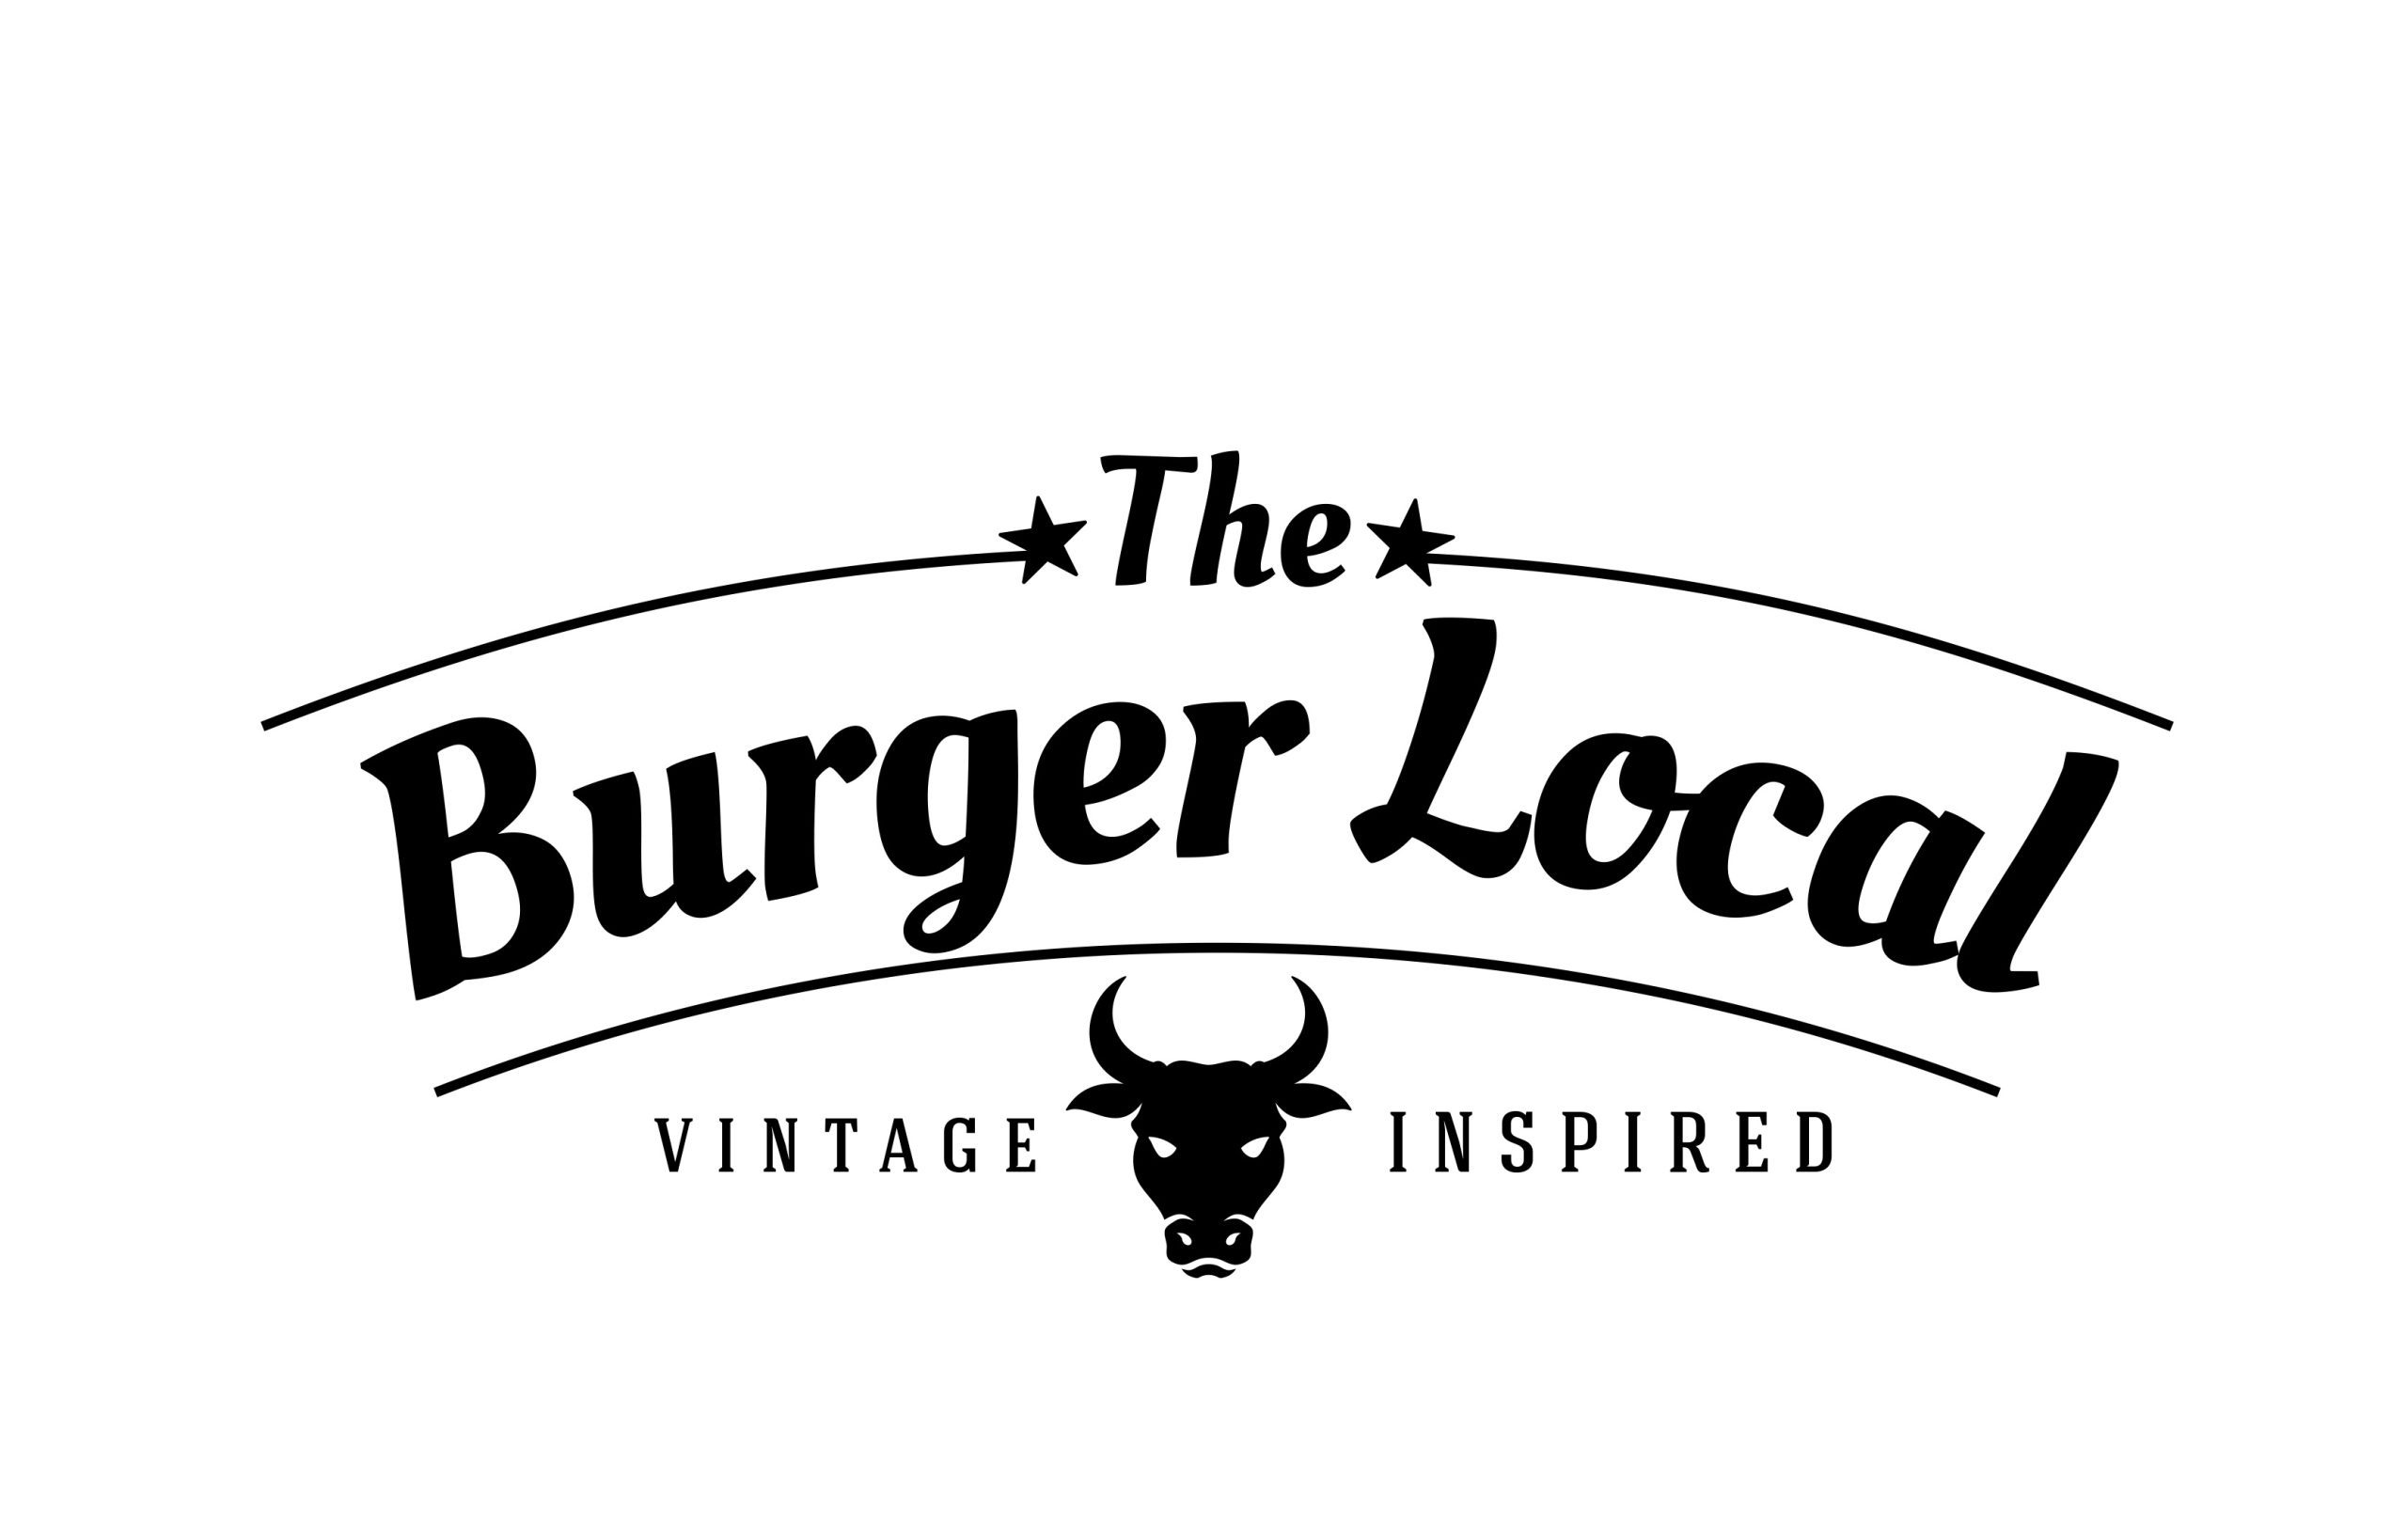 Burger Local, The